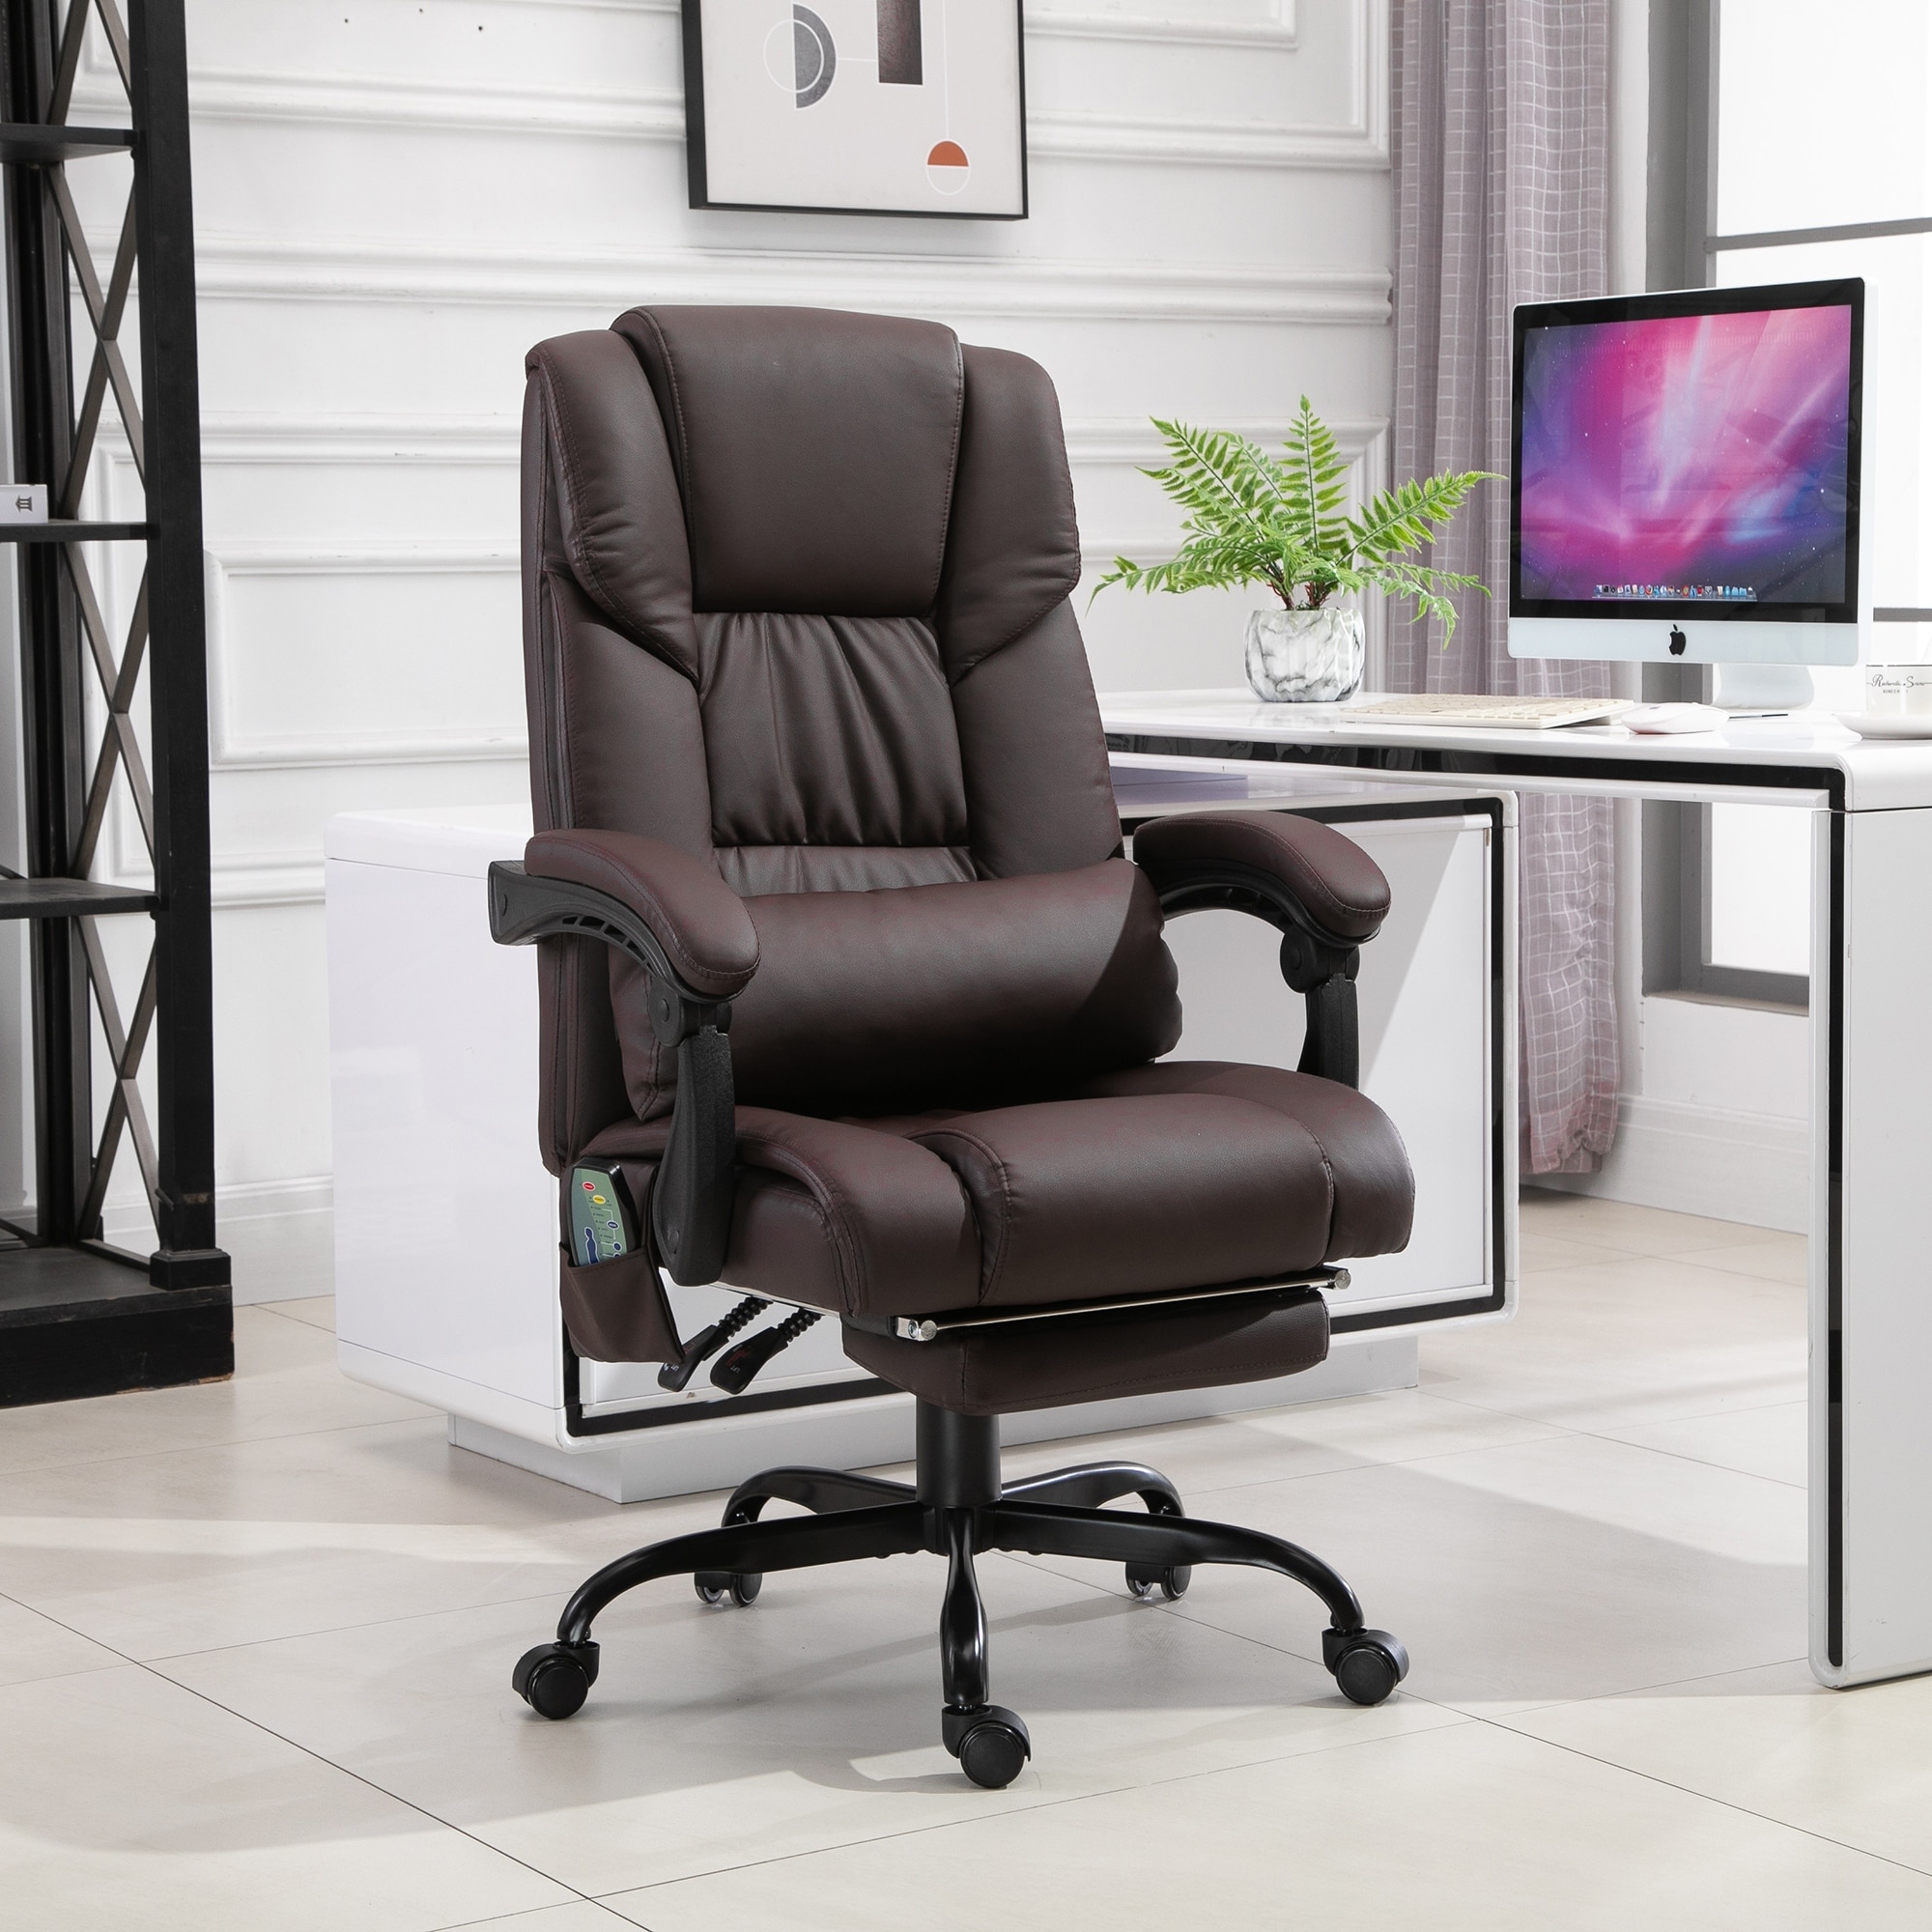 https://ak1.ostkcdn.com/images/products/is/images/direct/e55cb60b935e70669a37253c6f2d8d97f577b151/Vinsetto-Office-Desk-Chair-Recliner%2C-Height-Adjustable-Movable-Lumbar-Support-with-6-Point-Vibrating-Massage.jpg